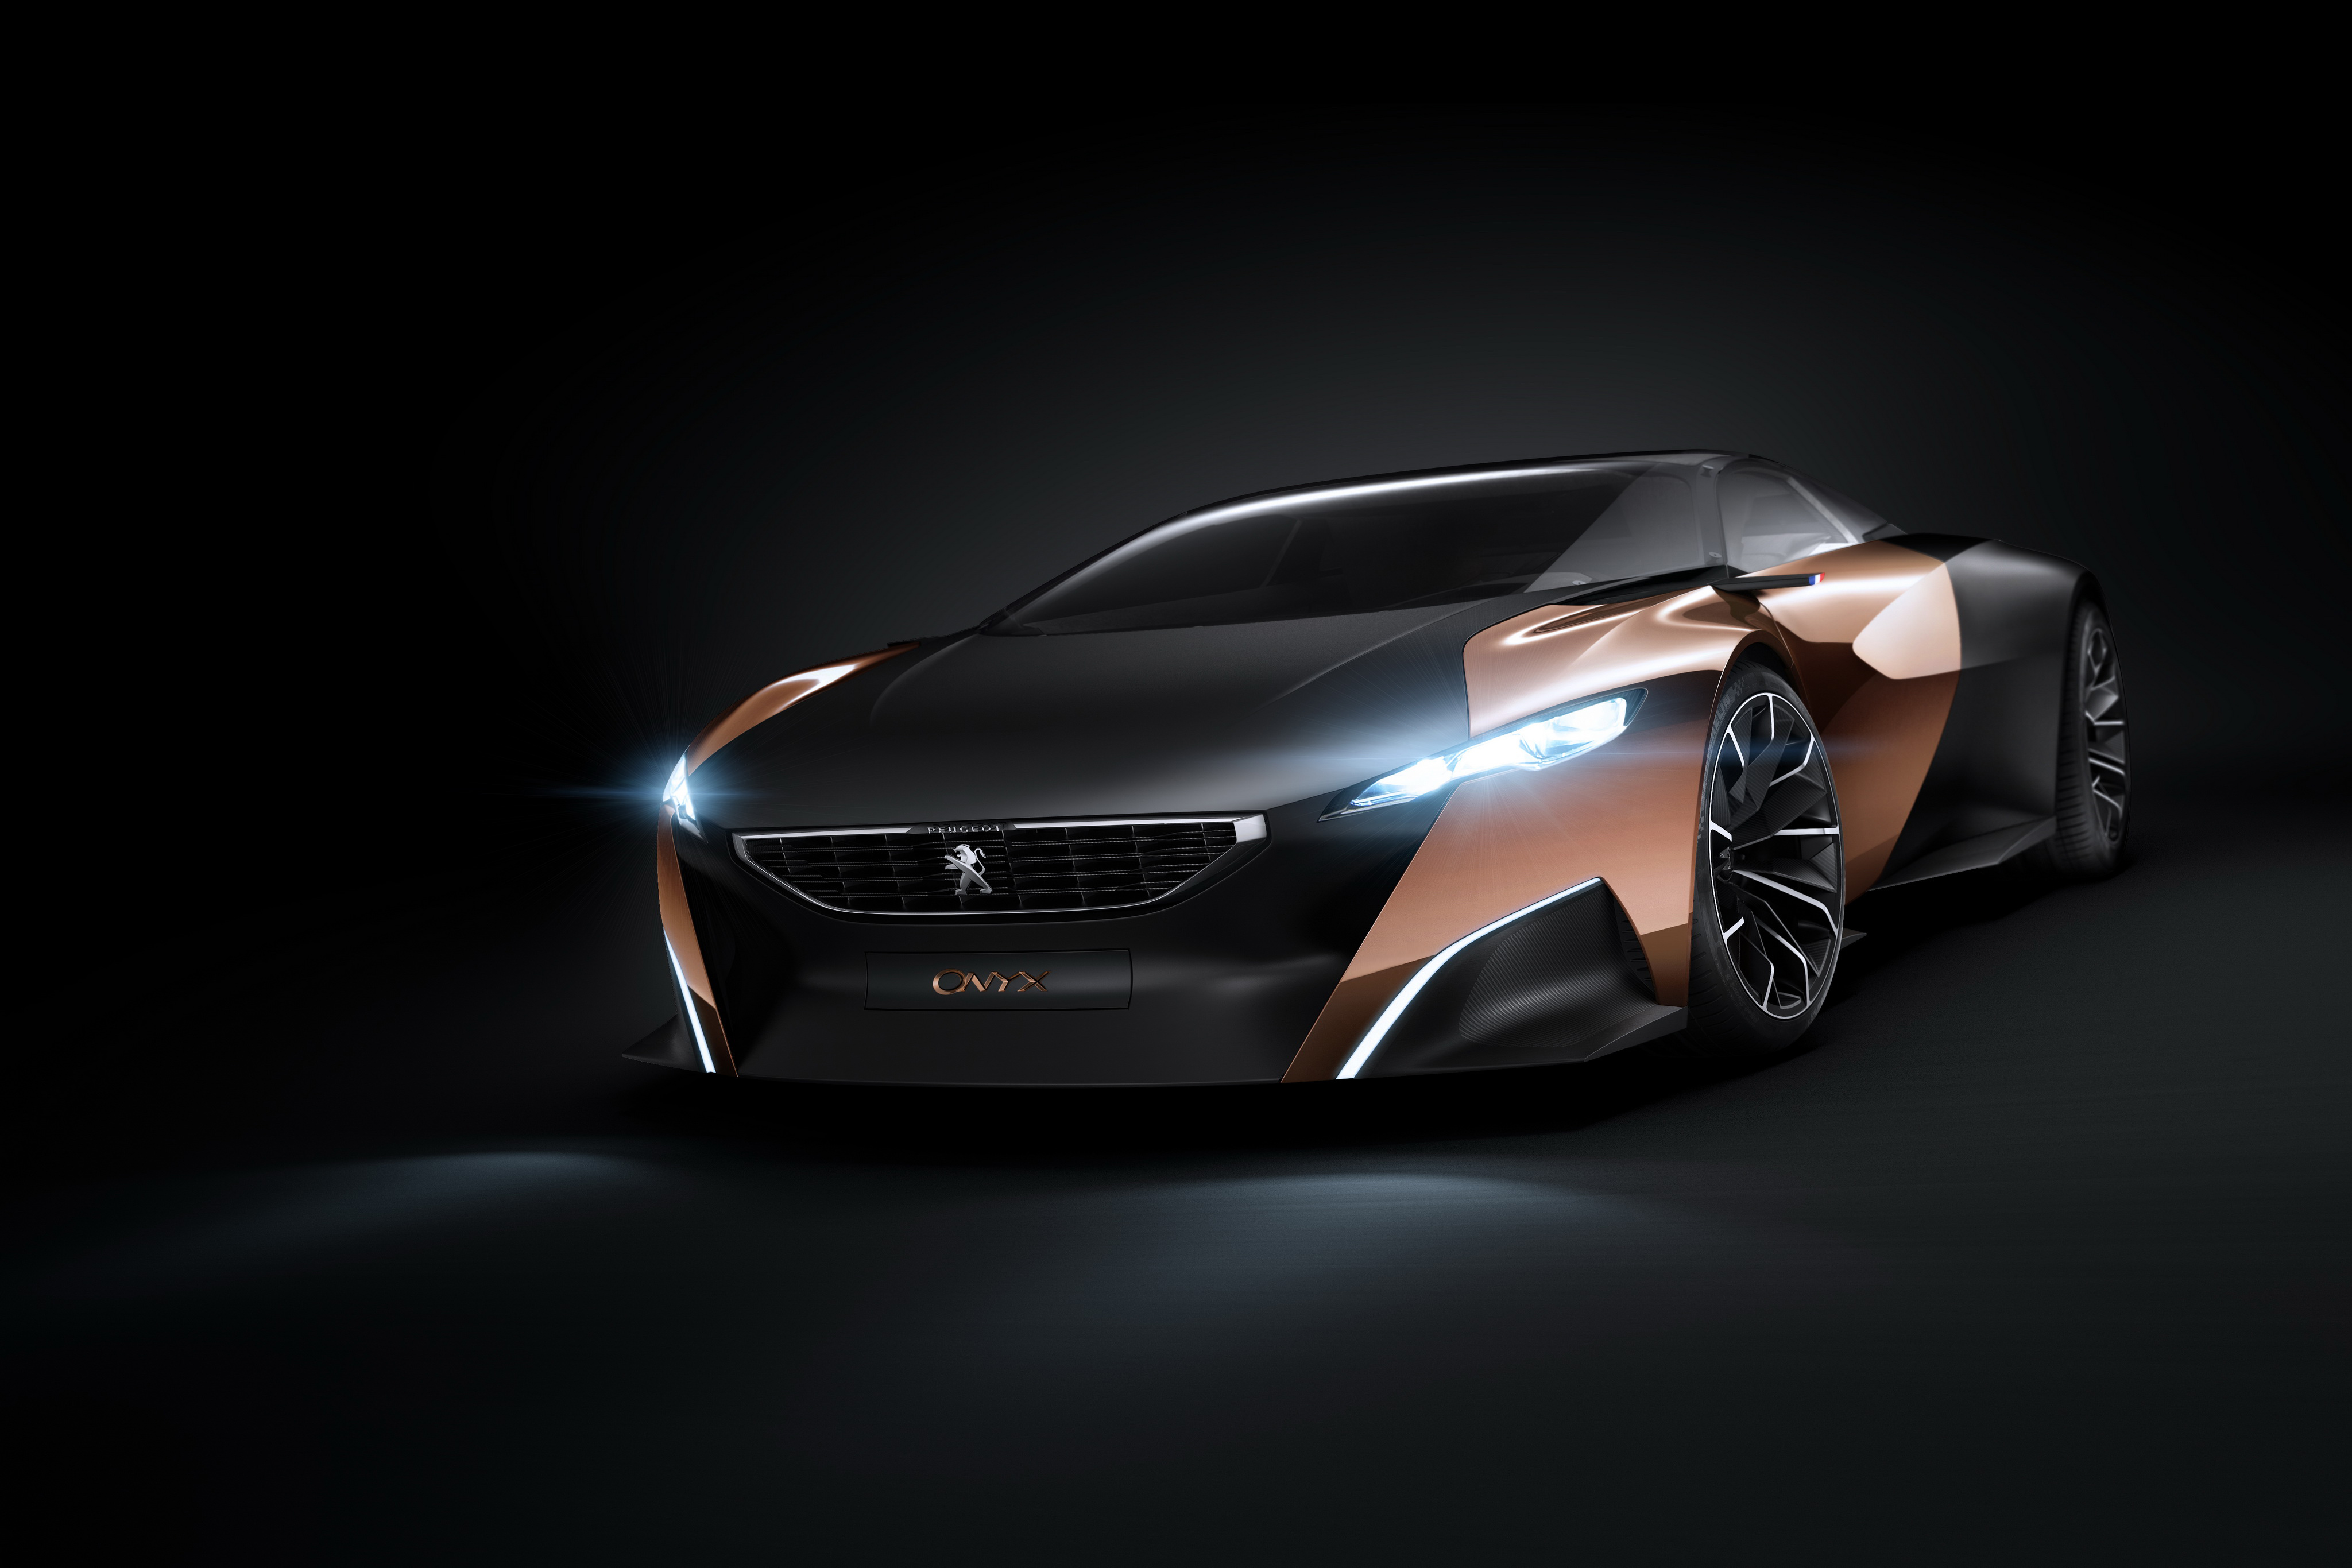 Free photo Download peugeot, cars, concept cars wallpapers on your phone for free